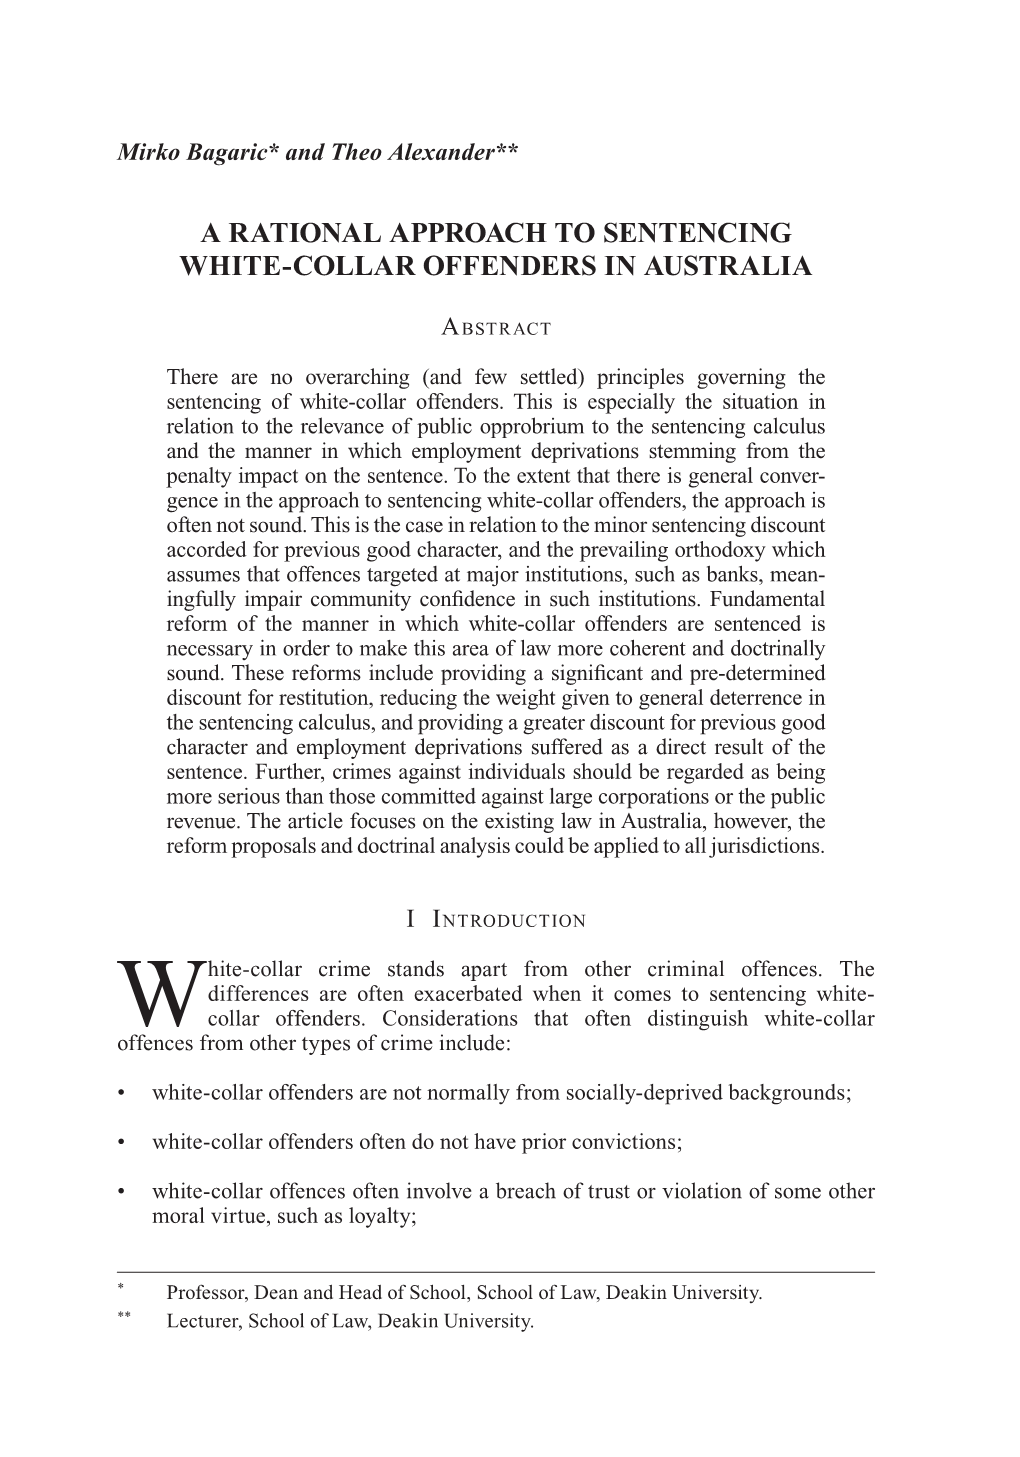 A Rational Approach to Sentencing White-Collar Offenders in Australia